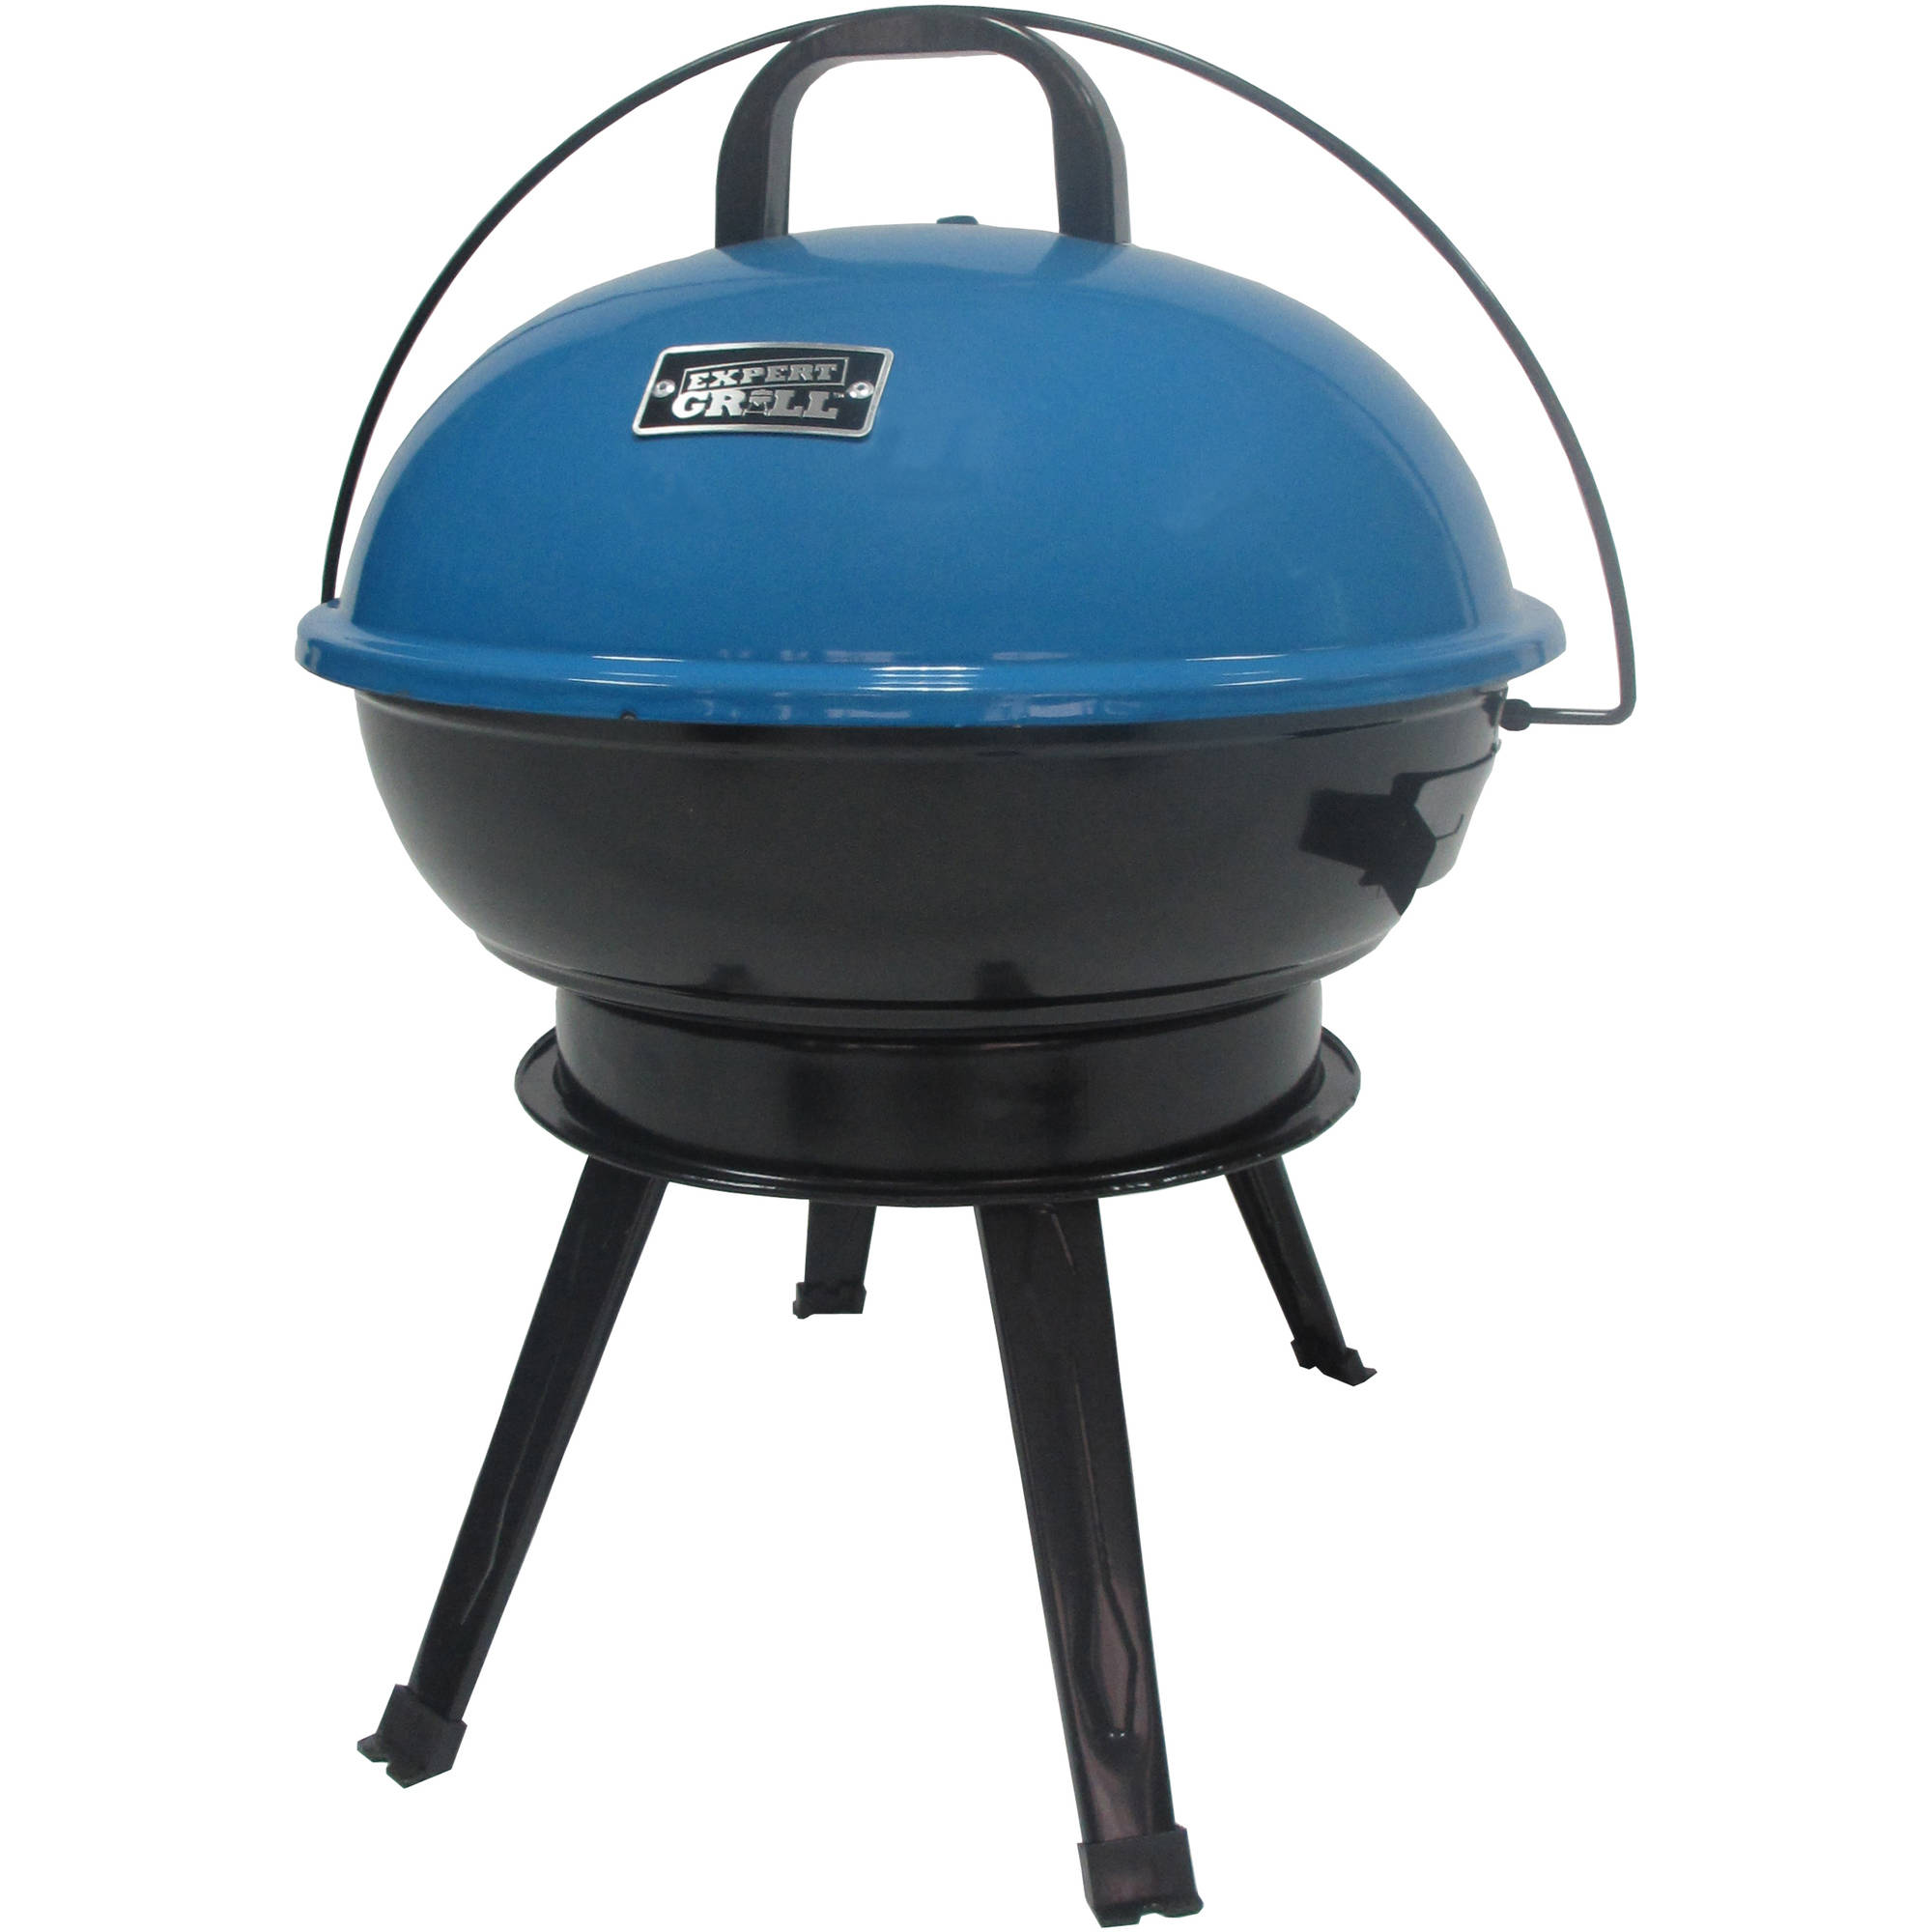 Expert Grill 14.5" Portable Charcoal Grill, Summer Lagoon - image 1 of 2